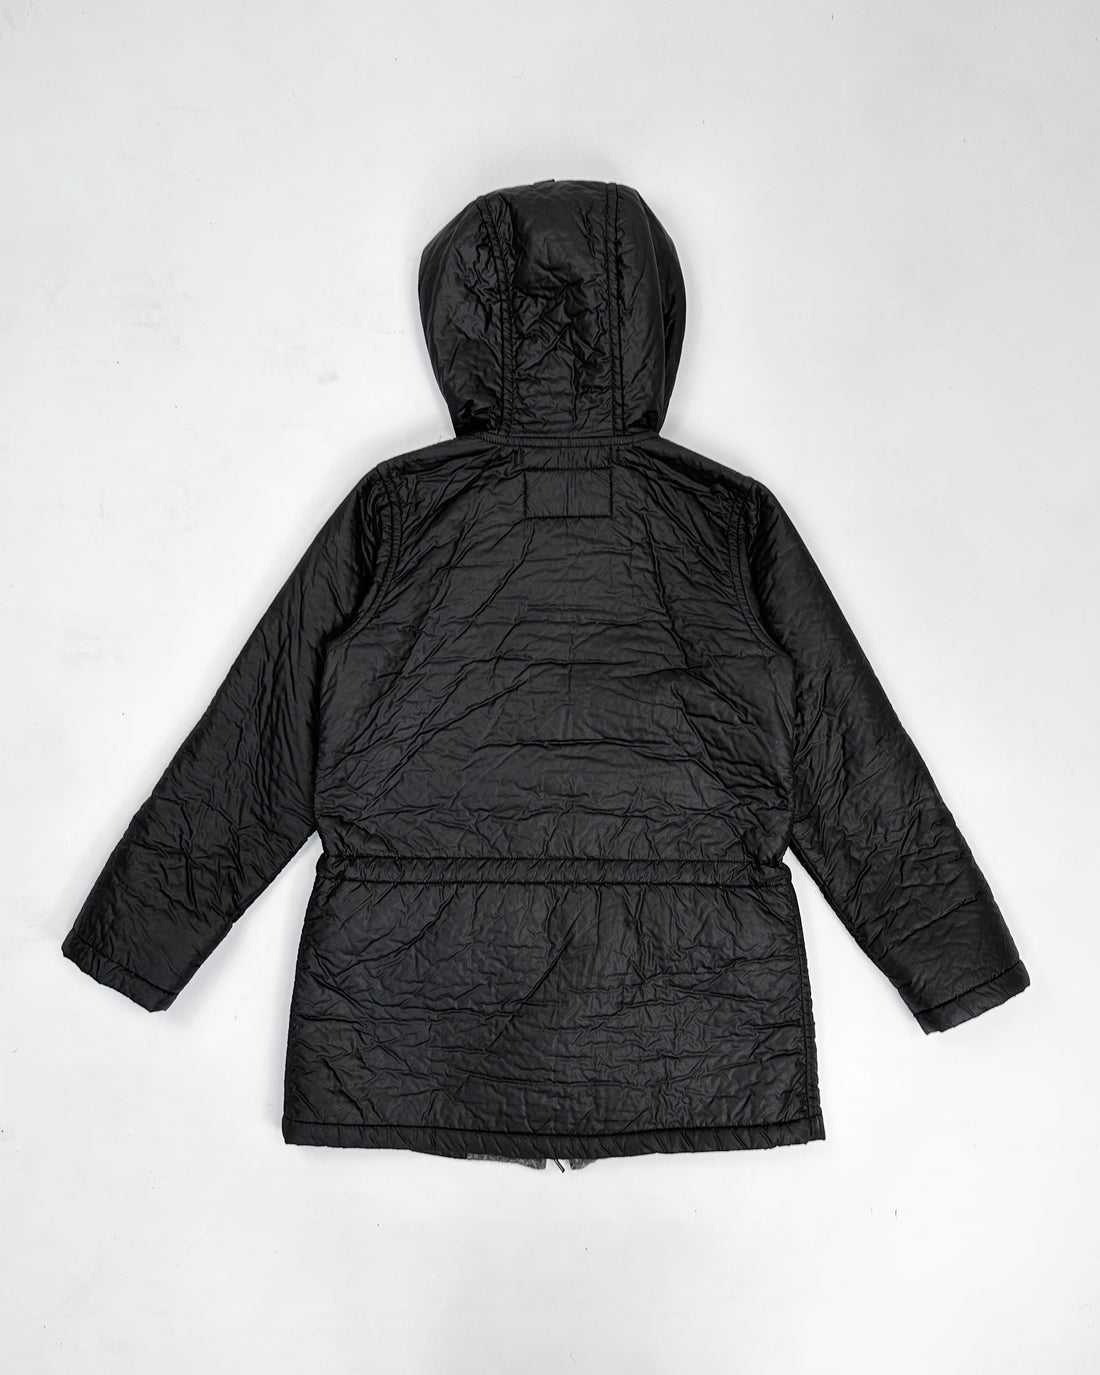 Cabane de Zucca By Issey Miyake Textured Hooded Jacket 1990's